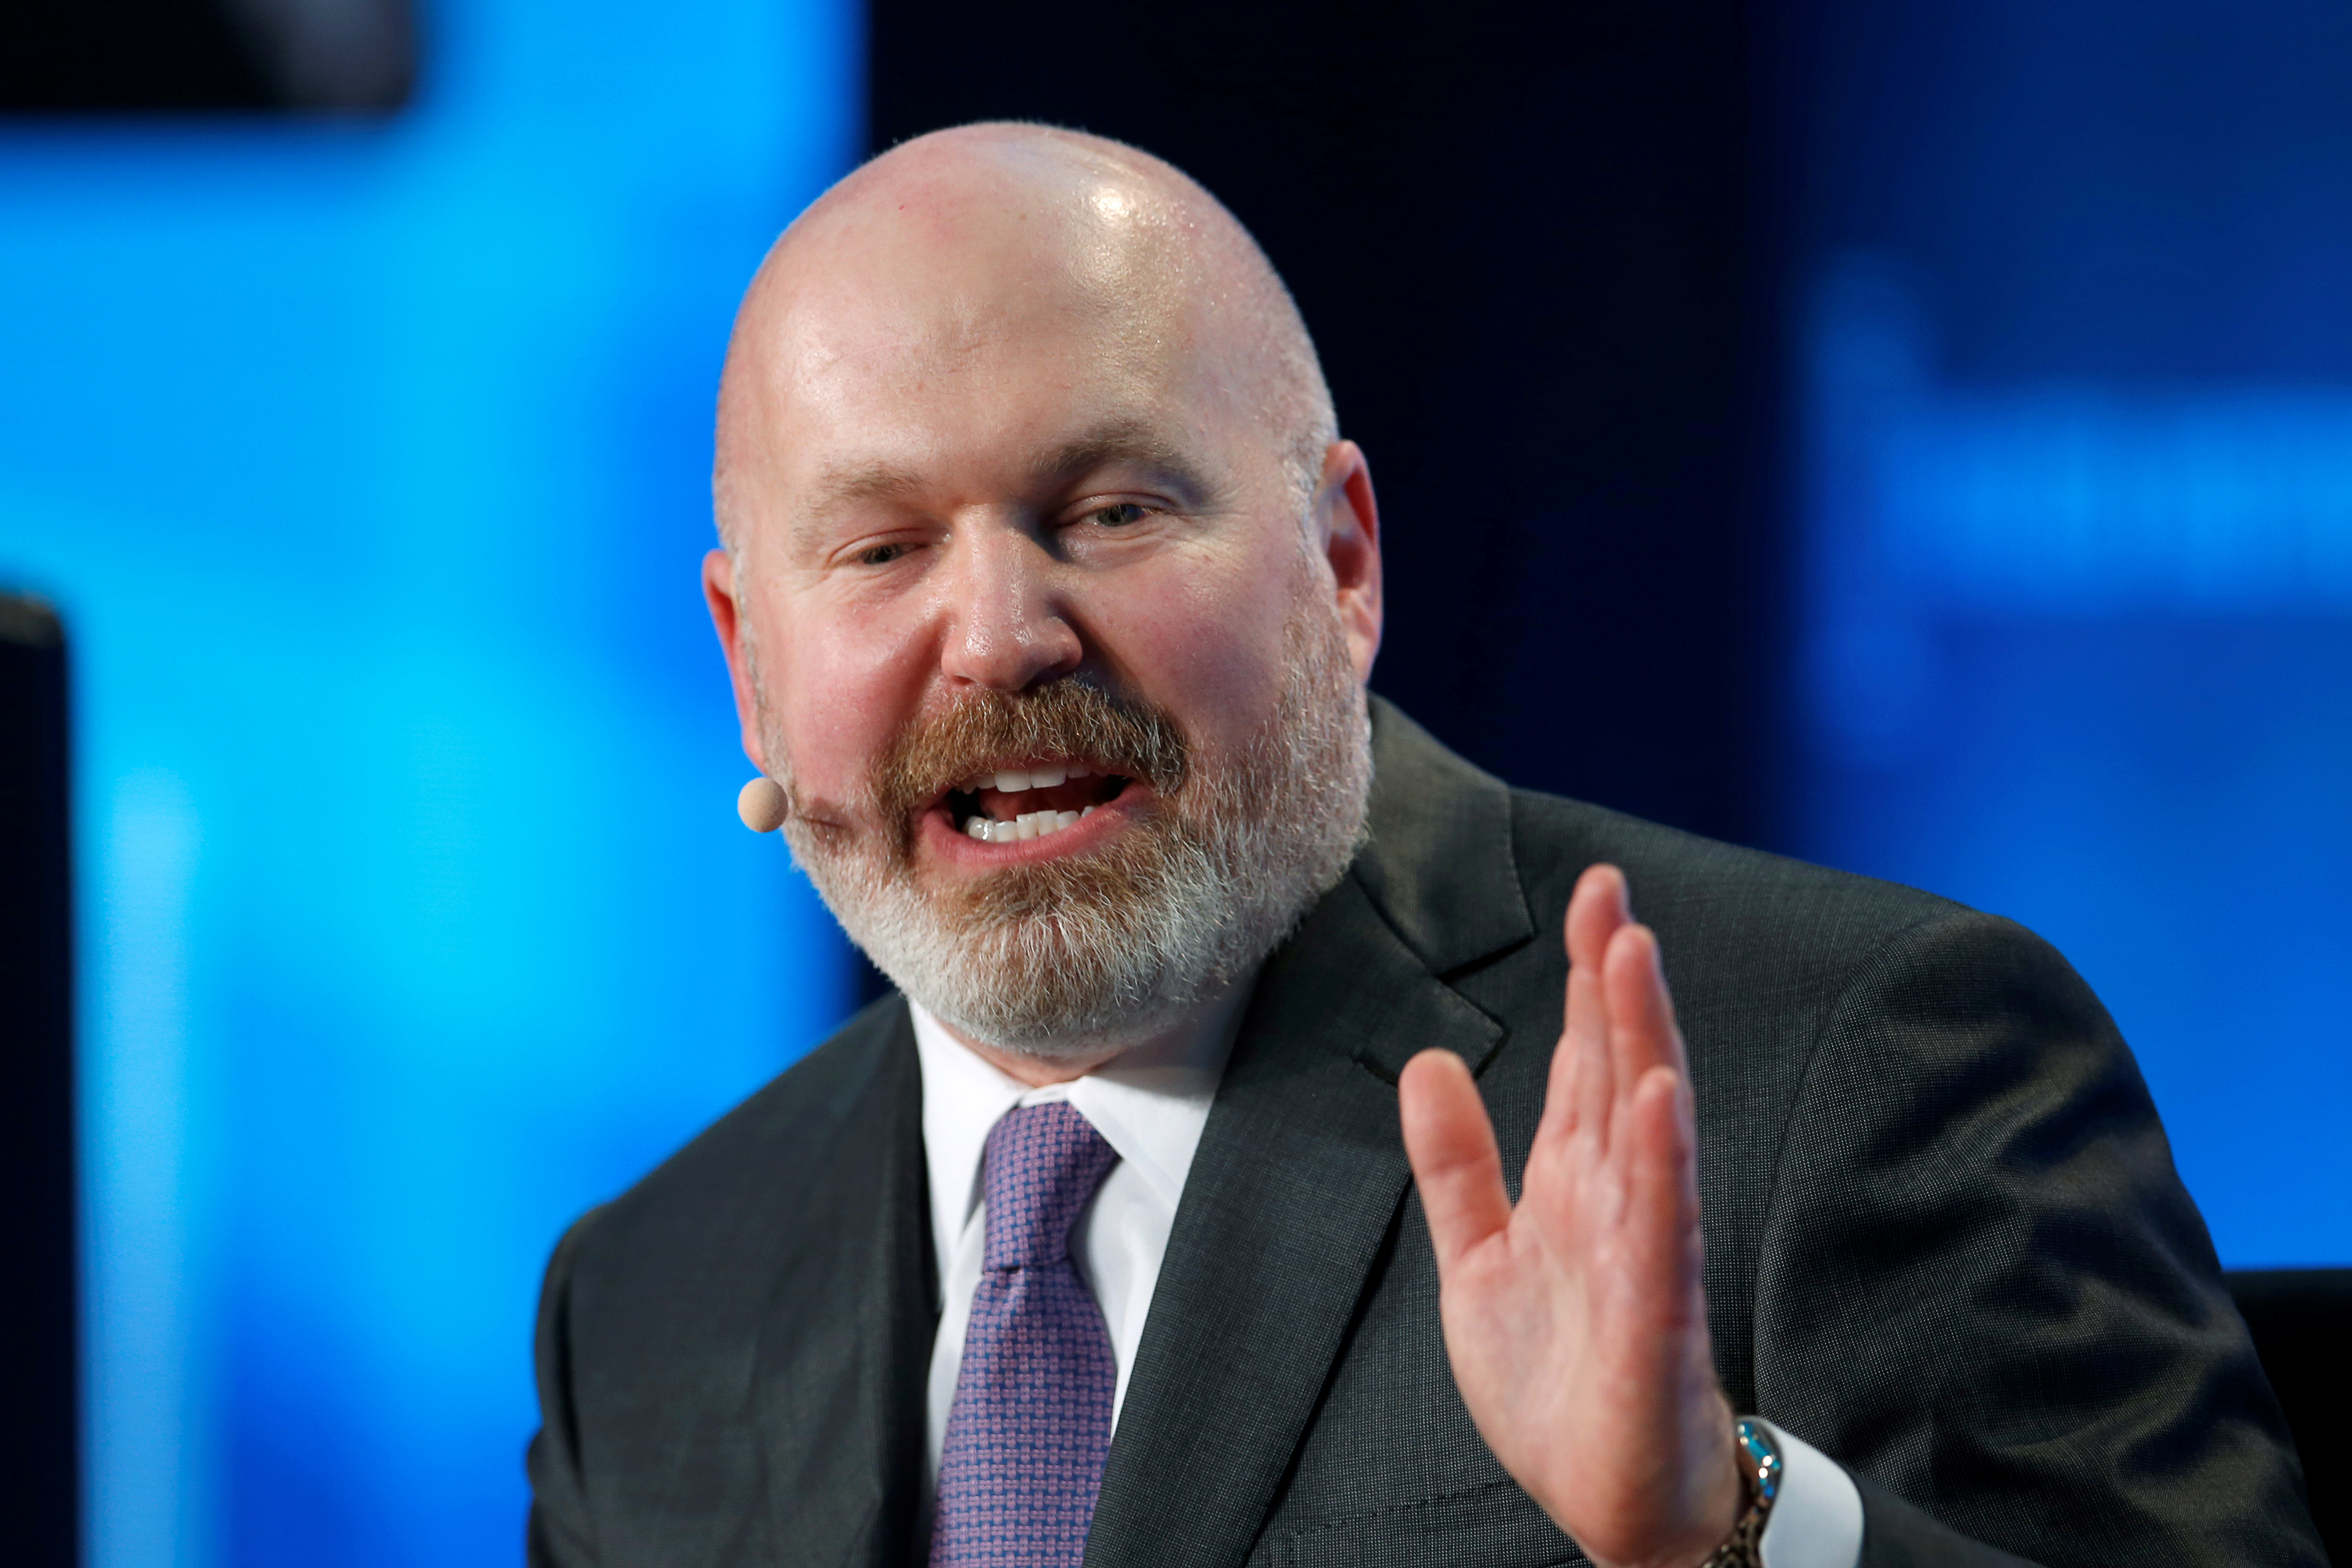 File photo of Cliff Asness, Co-Founder, Managing Principal and Chief Investment Officer of AQR Capital Management, speaking at the Milken Institute Global Conference in Beverly Hills